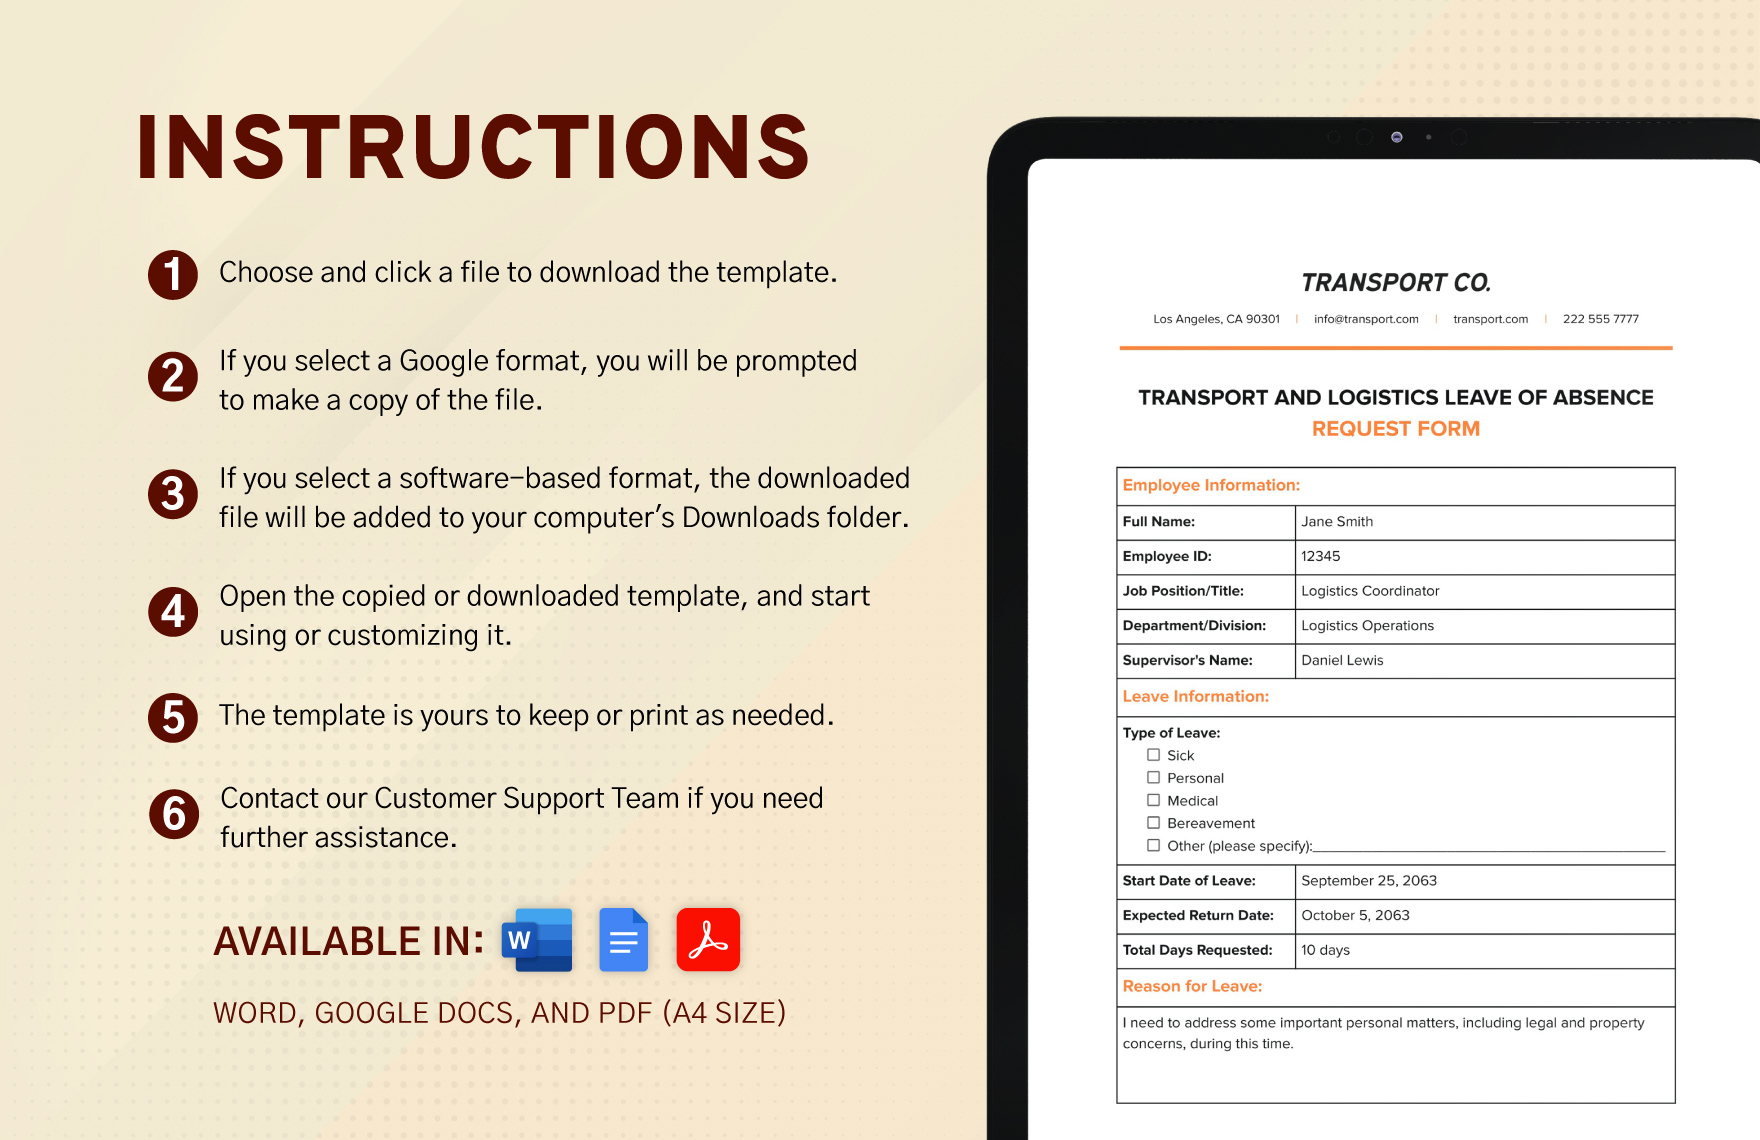 Transport and Logistics Leave of Absence Request Form Template